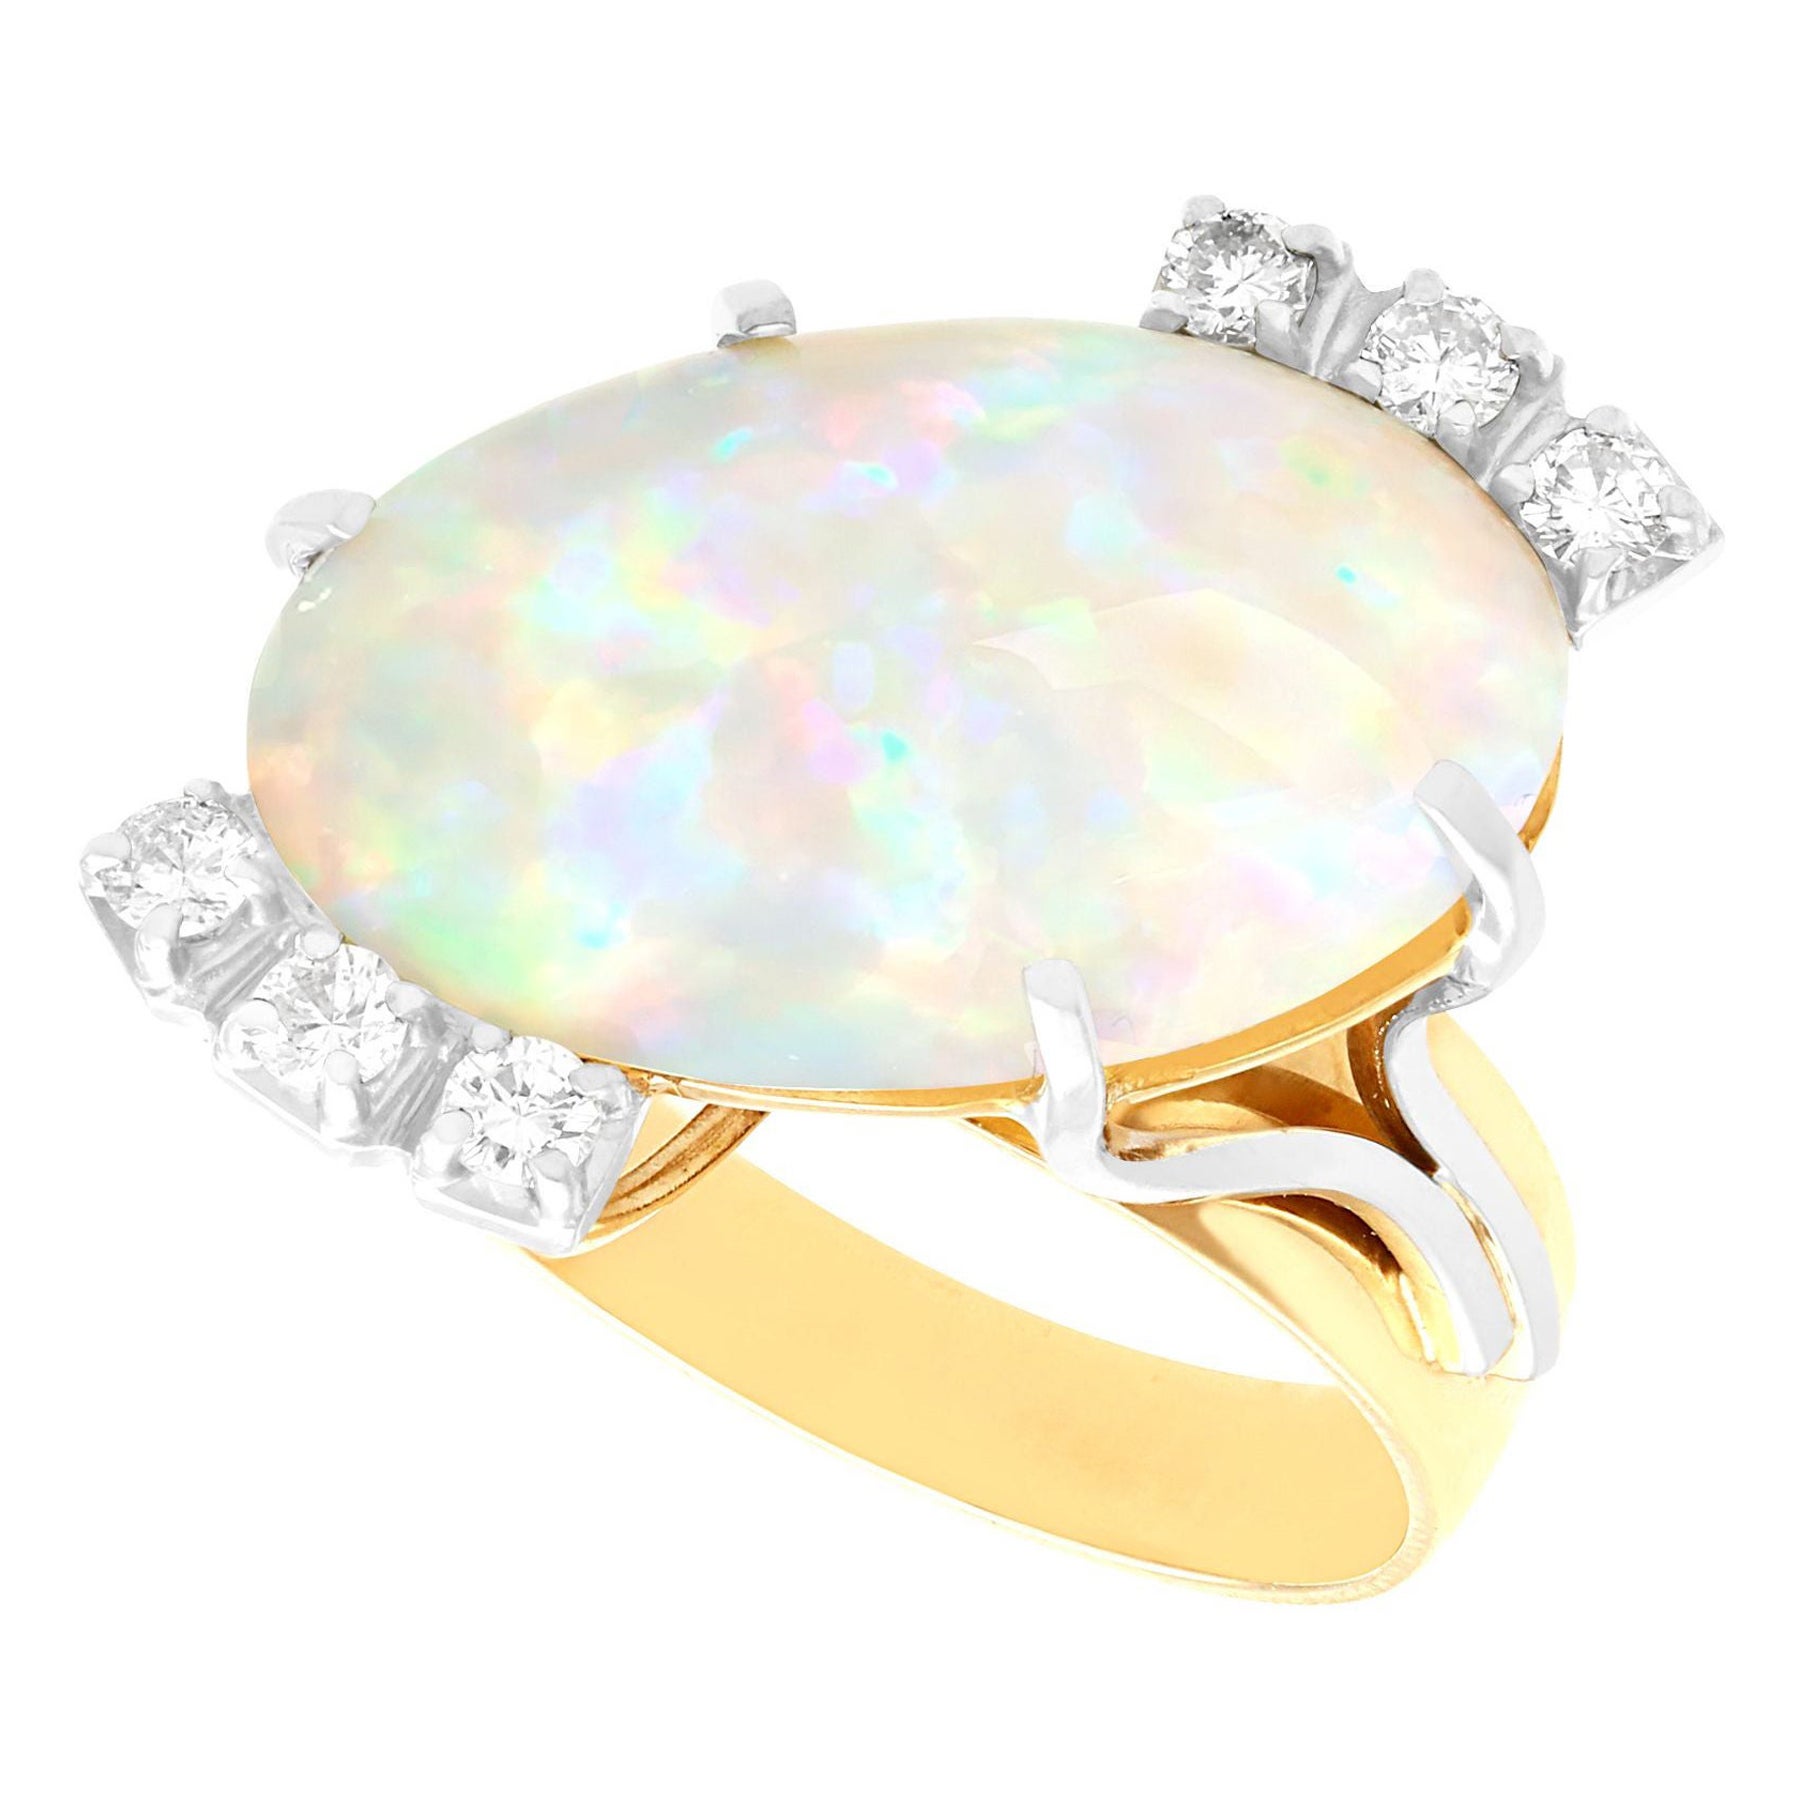 1960s Vintage 5.81 Carat Opal and Diamond Yellow Gold Cocktail Ring For Sale